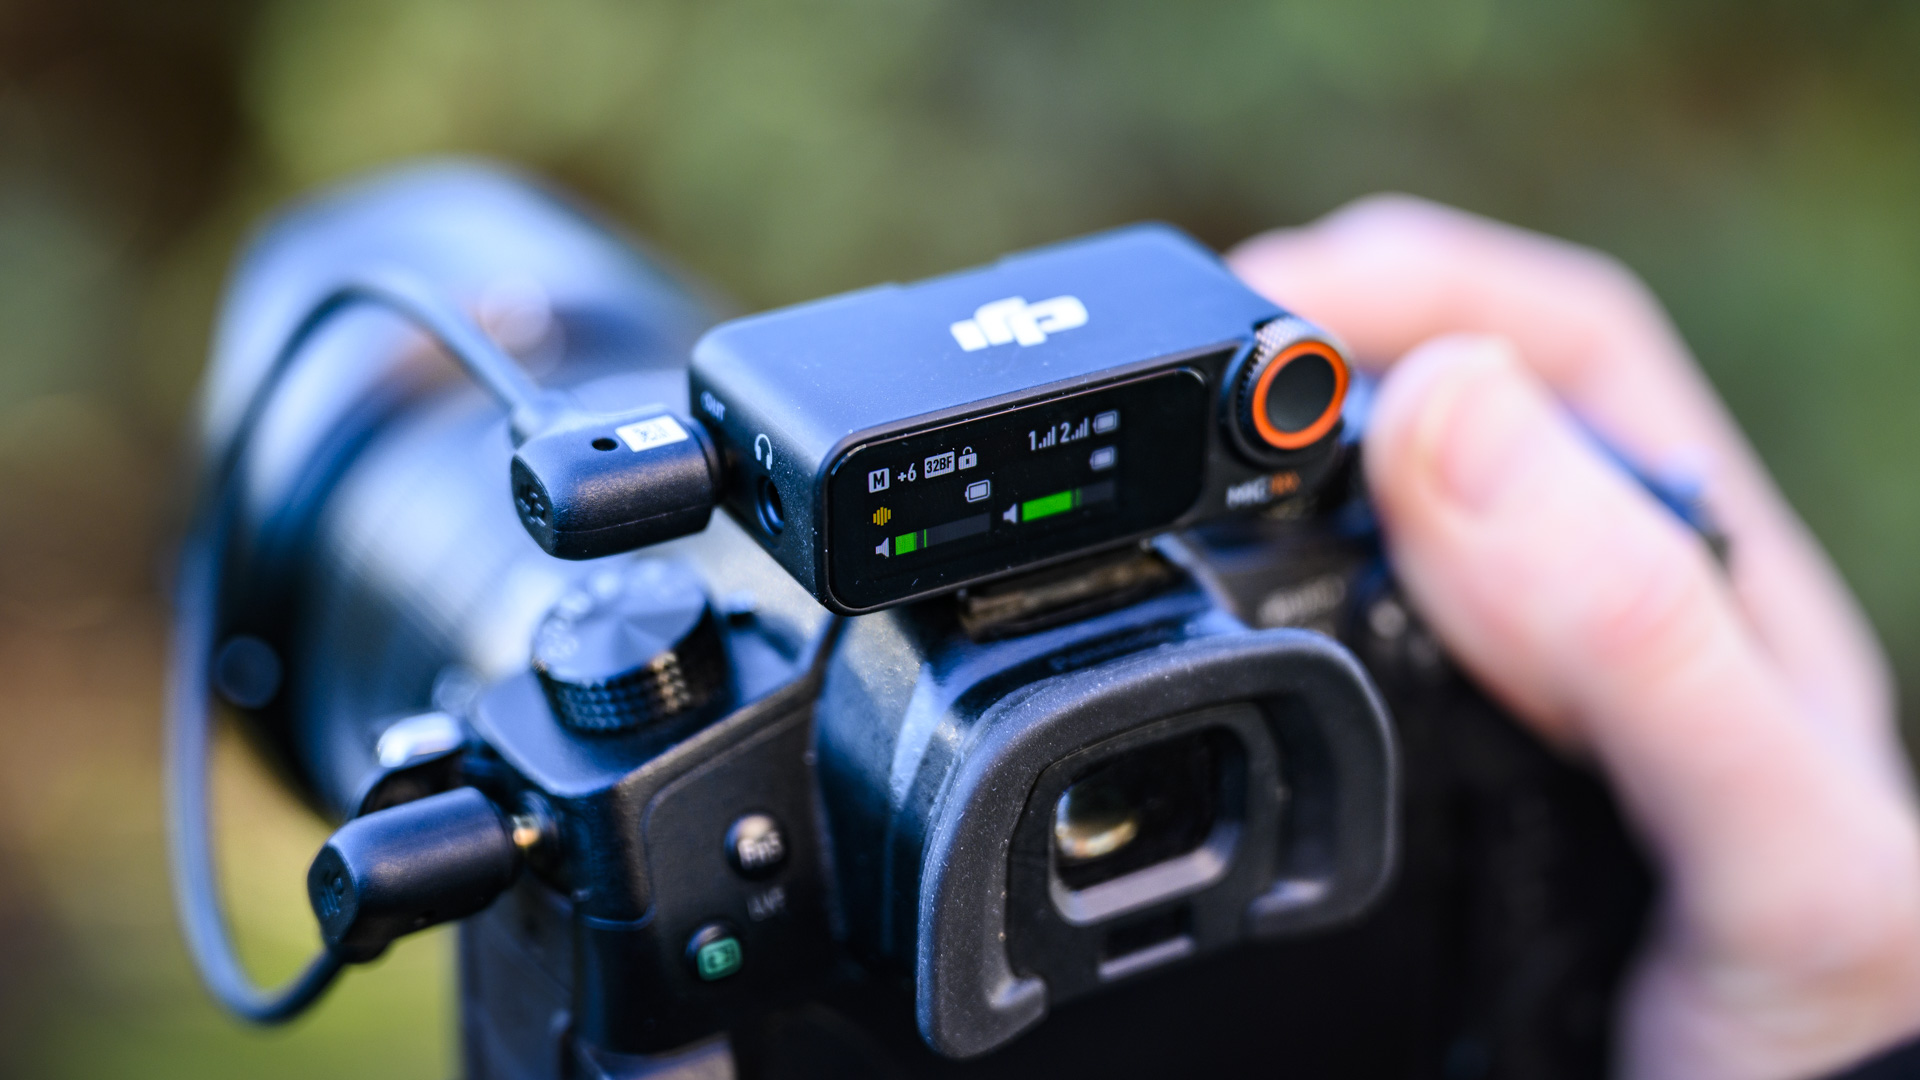 DJI Mic 2 recevier attached to a mirrorless camera